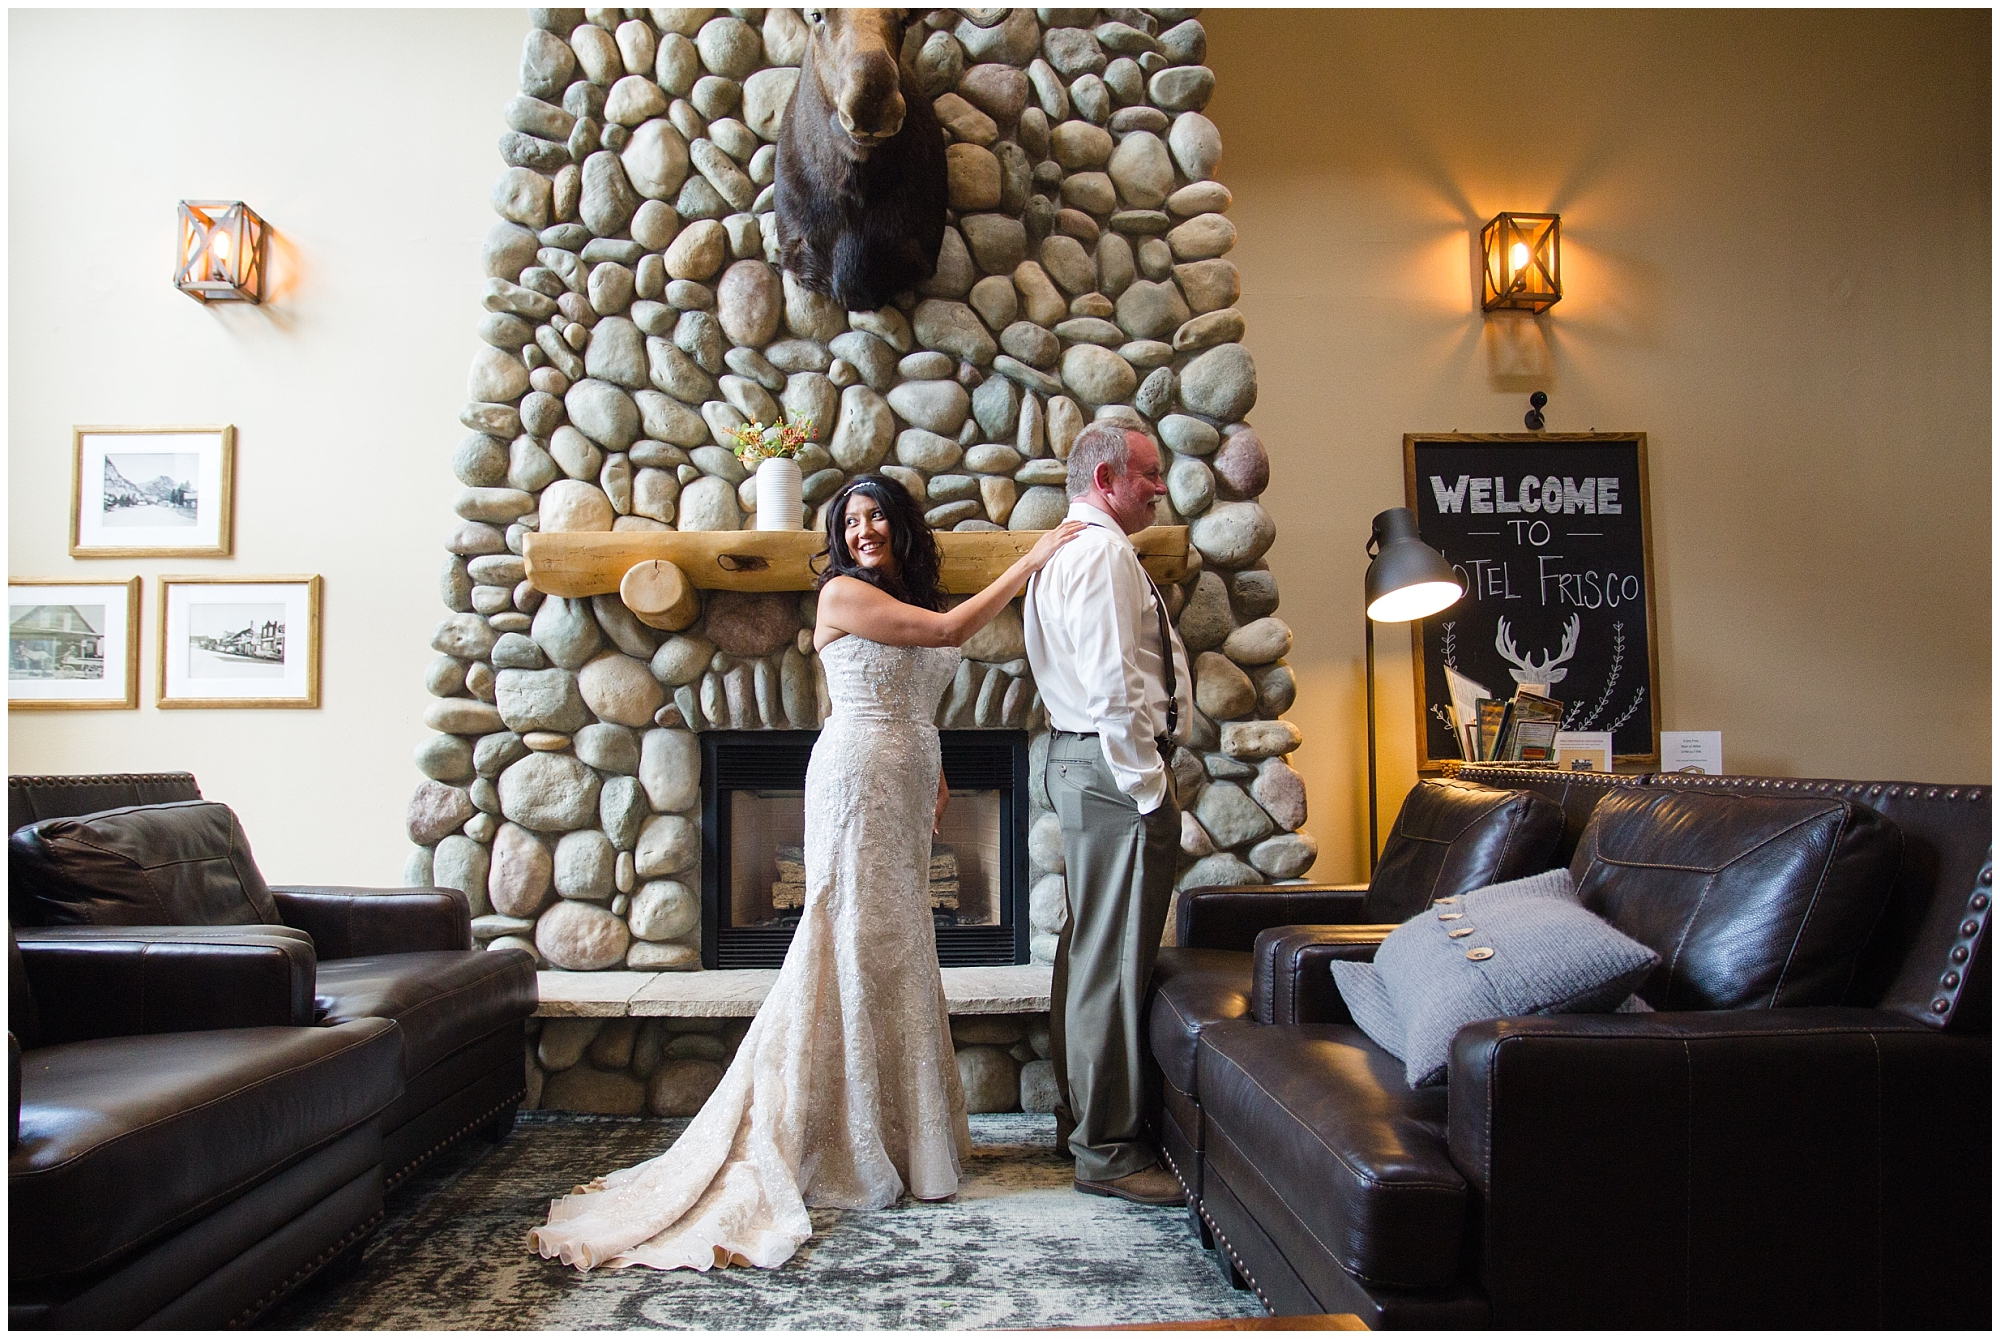 At a Colorado mountain wedding, the bride approached her groom for their first look inside a cabin.